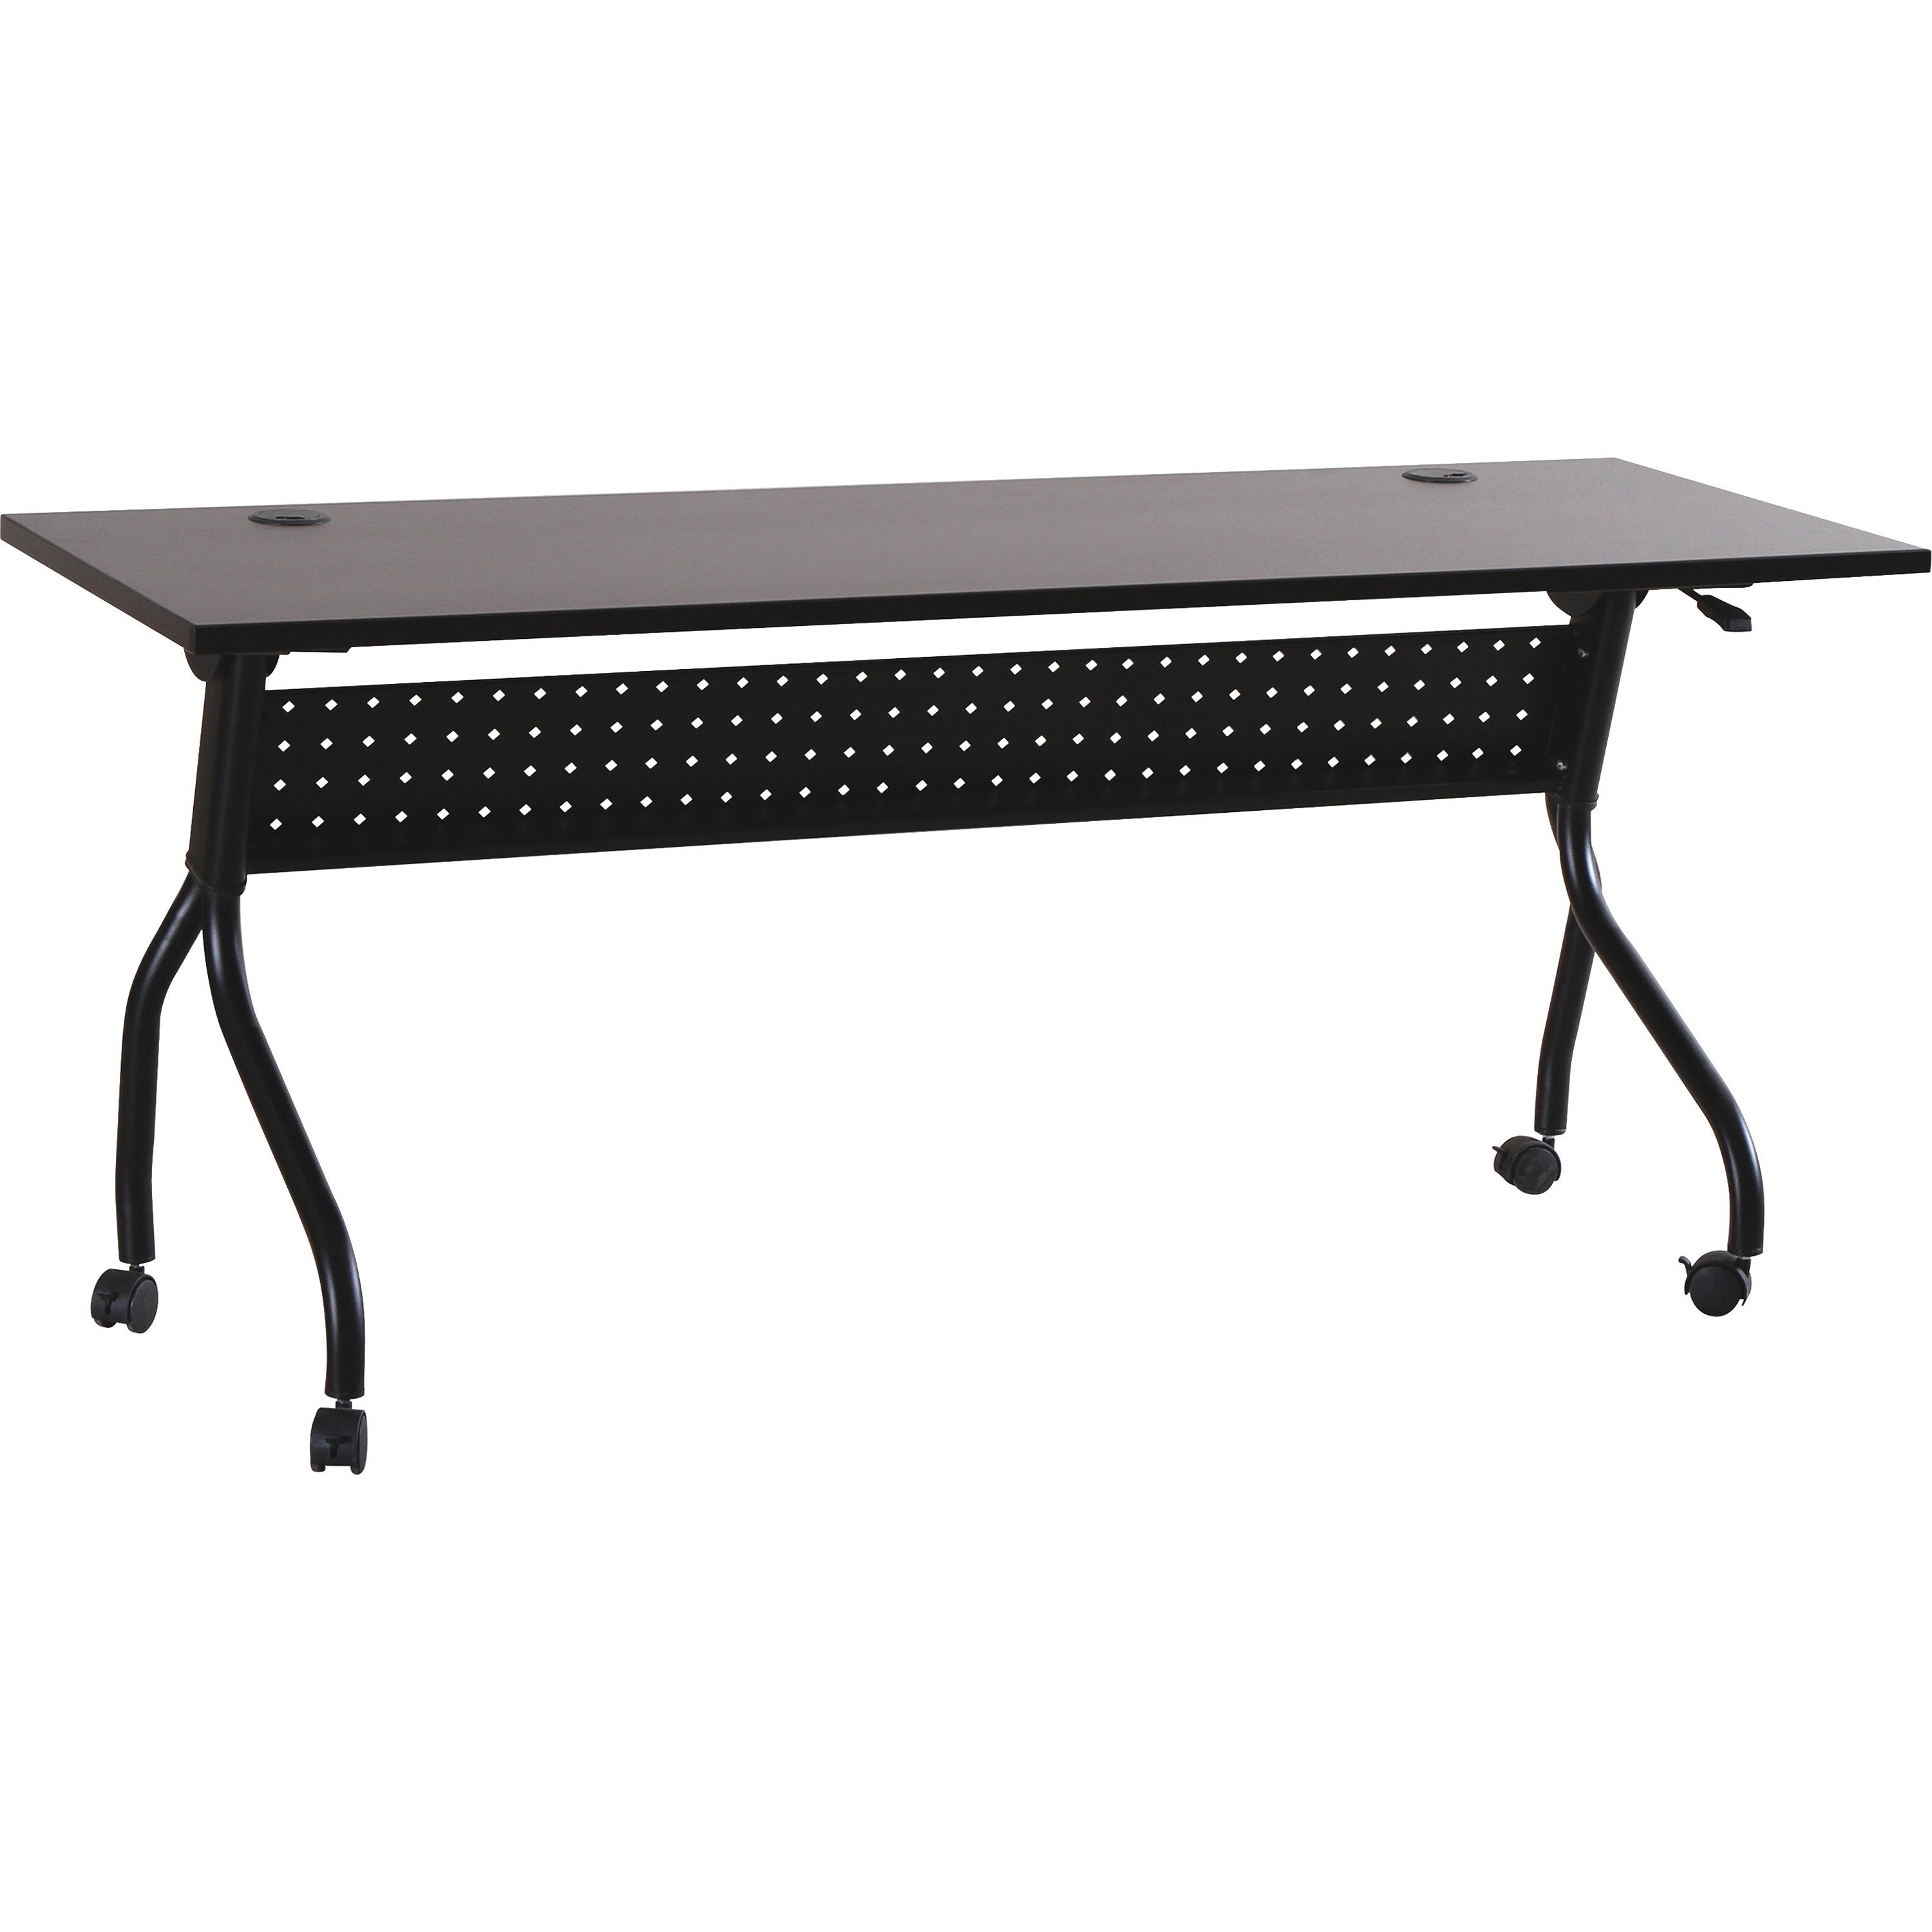 Lorell Flip Top Training Table - For - Table TopRectangle Top - Four Leg Base - 4 Legs x 72" Table Top Width x 23.50" Table Top Depth - 29.50" Height x 70.88" Width x 23.63" Depth - Assembly Required - Espresso, Black - Melamine, Nylon - 1 Each - 